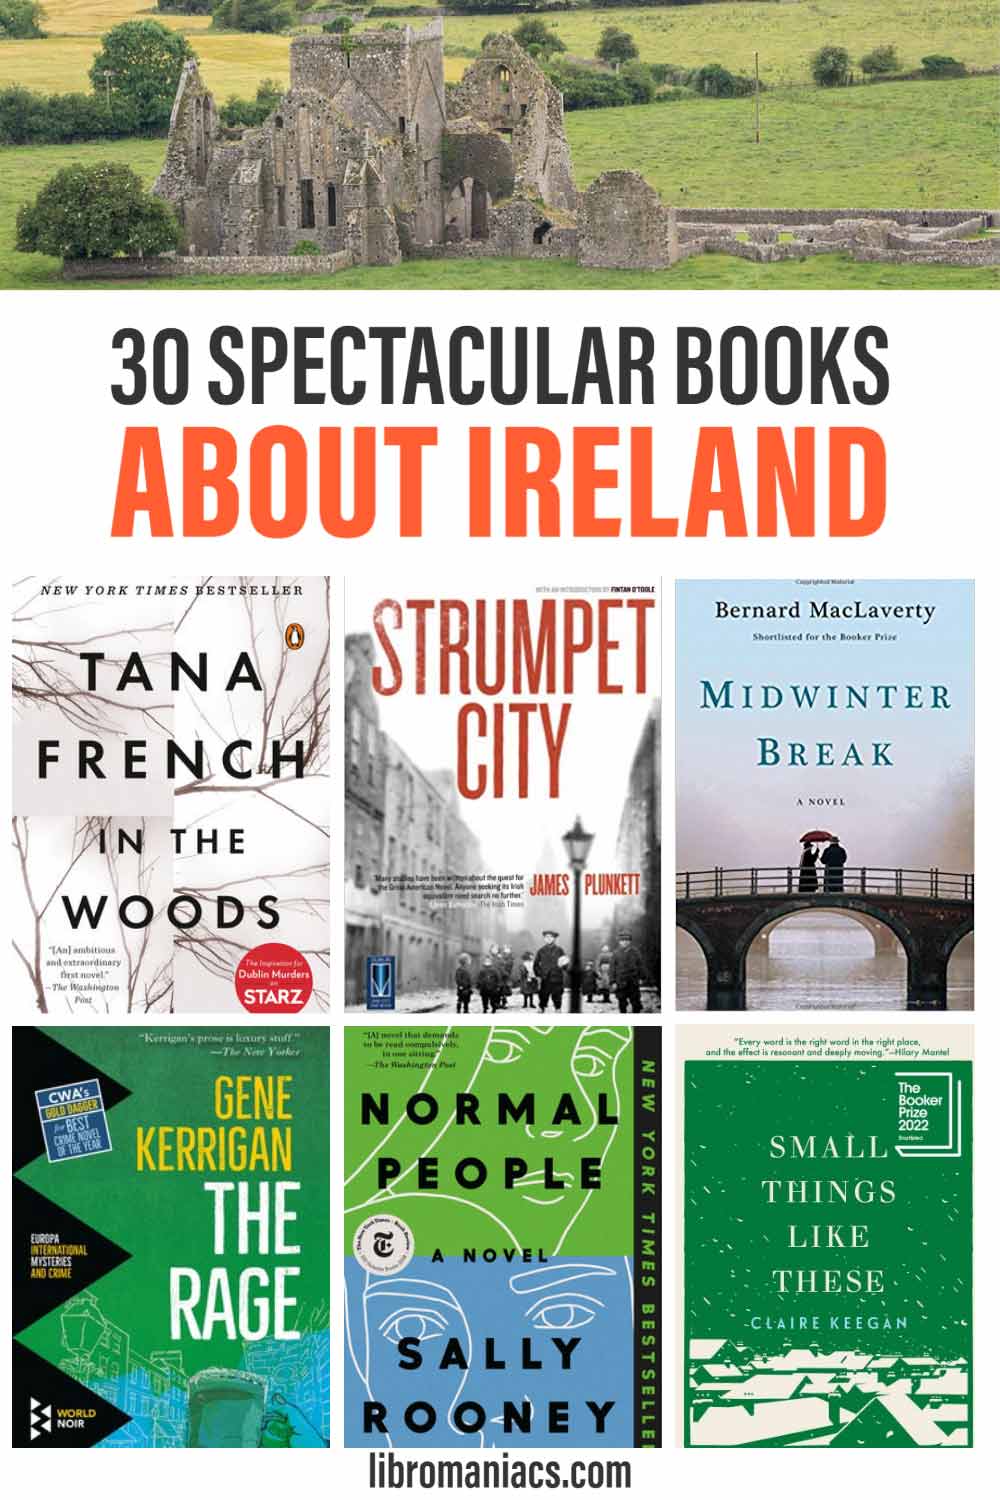 30 Spectacular books about Ireland, with book covers. 